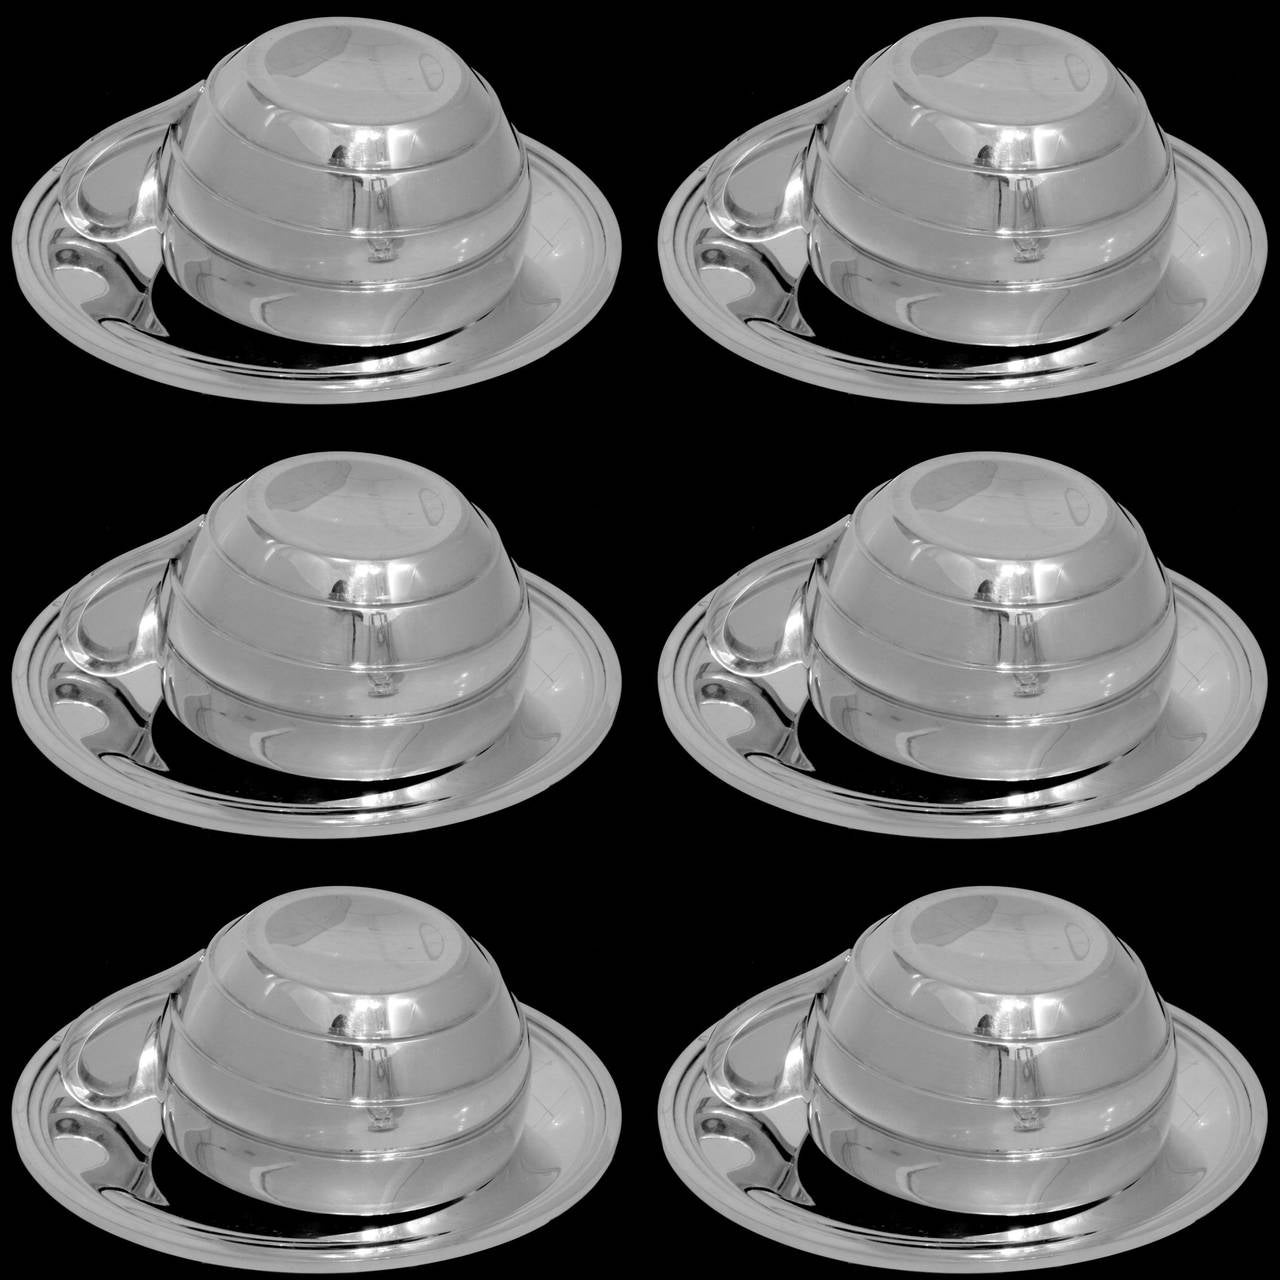 RAVINET Massive French Sterling Silver Vermeil Six Coffee/Tea Cups w/Saucers 

Head of Minerve 1 st titre for 950/1000 French Sterling Silver Vermeil guarantee 

Exceptional and rare service 6 pc of French Sterling Silver Tea/Coffee/Chocolate,